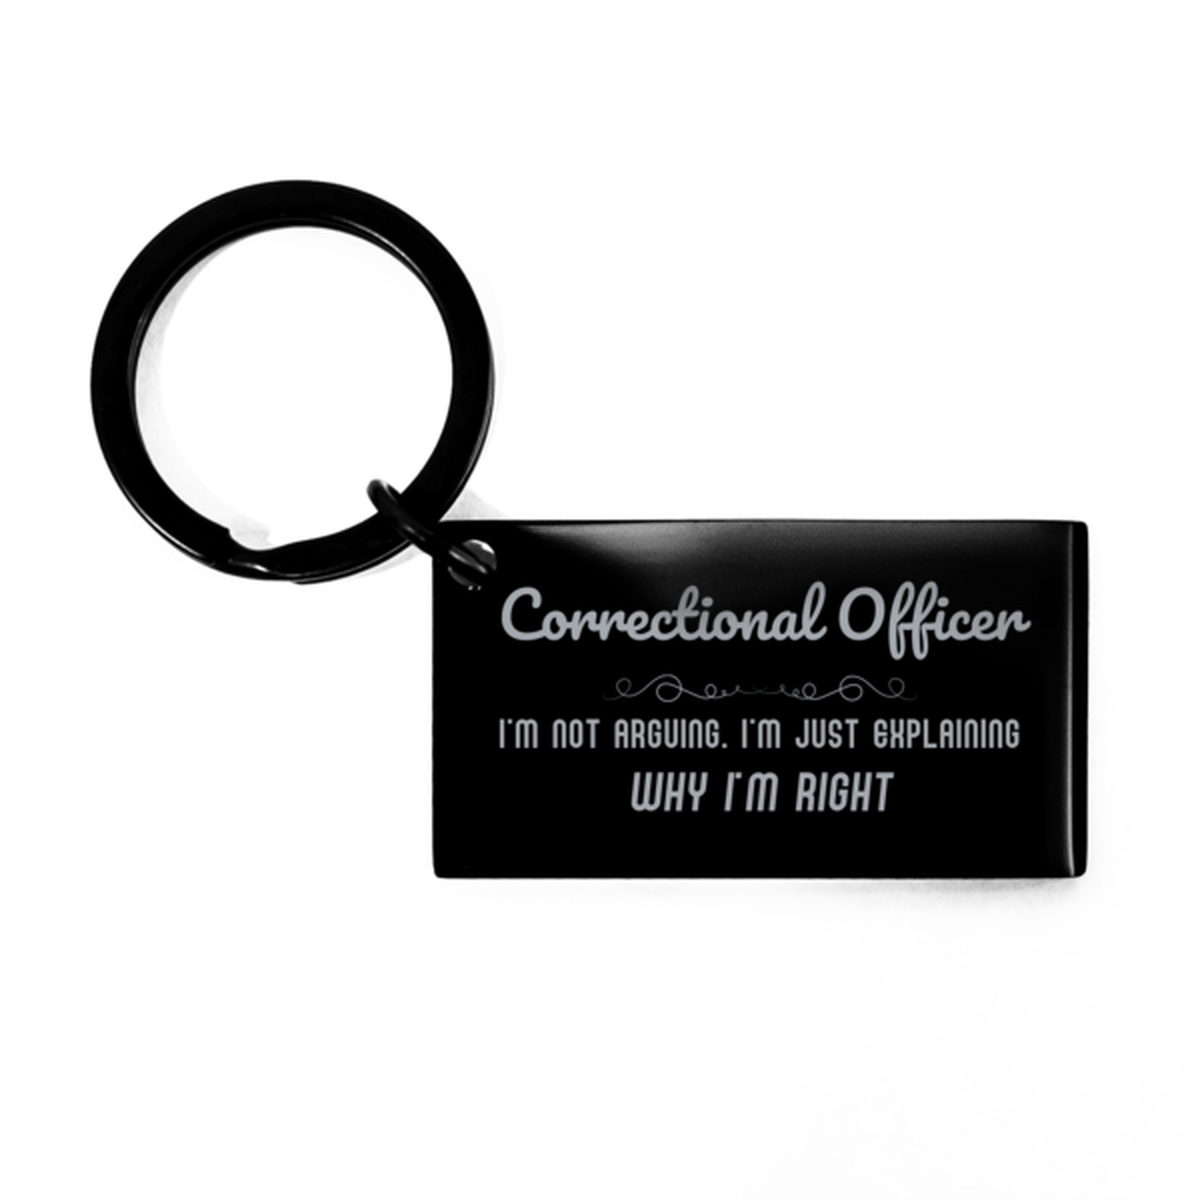 Correctional Officer I'm not Arguing. I'm Just Explaining Why I'm RIGHT Keychain, Funny Saying Quote Correctional Officer Gifts For Correctional Officer Graduation Birthday Christmas Gifts for Men Women Coworker